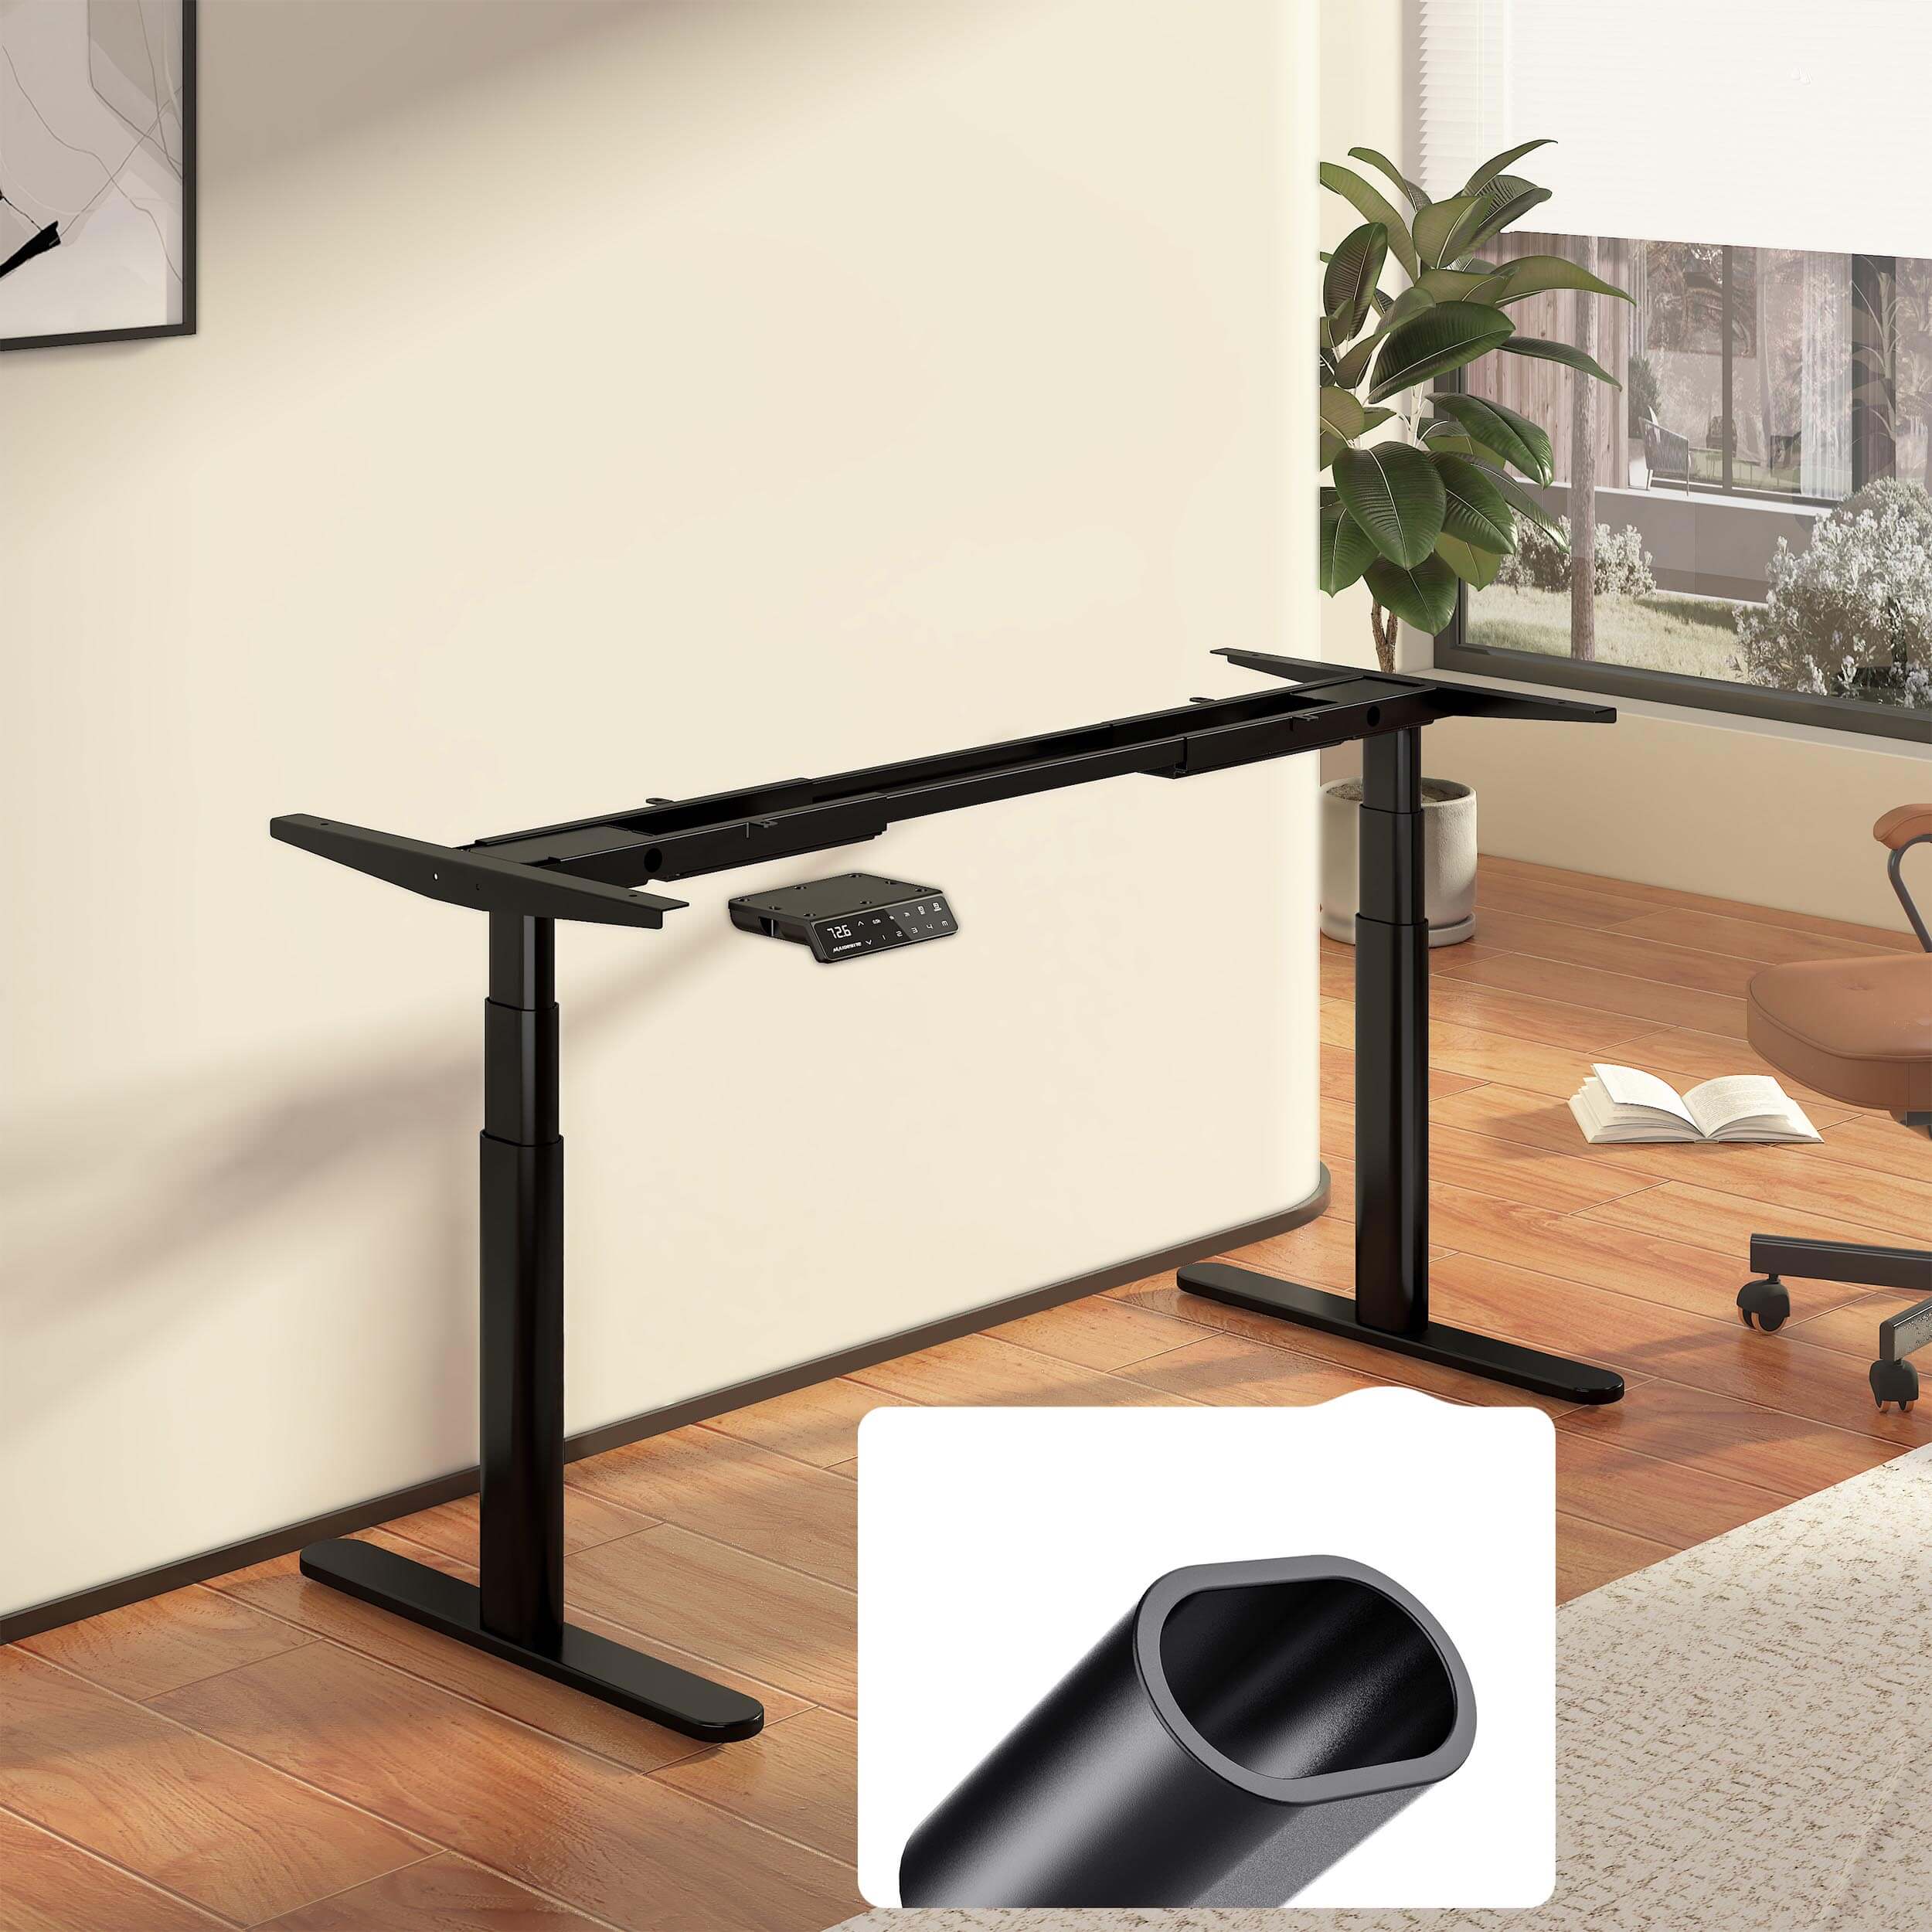 TH2 Pro Plus oval standing desk leg frame more stable solid